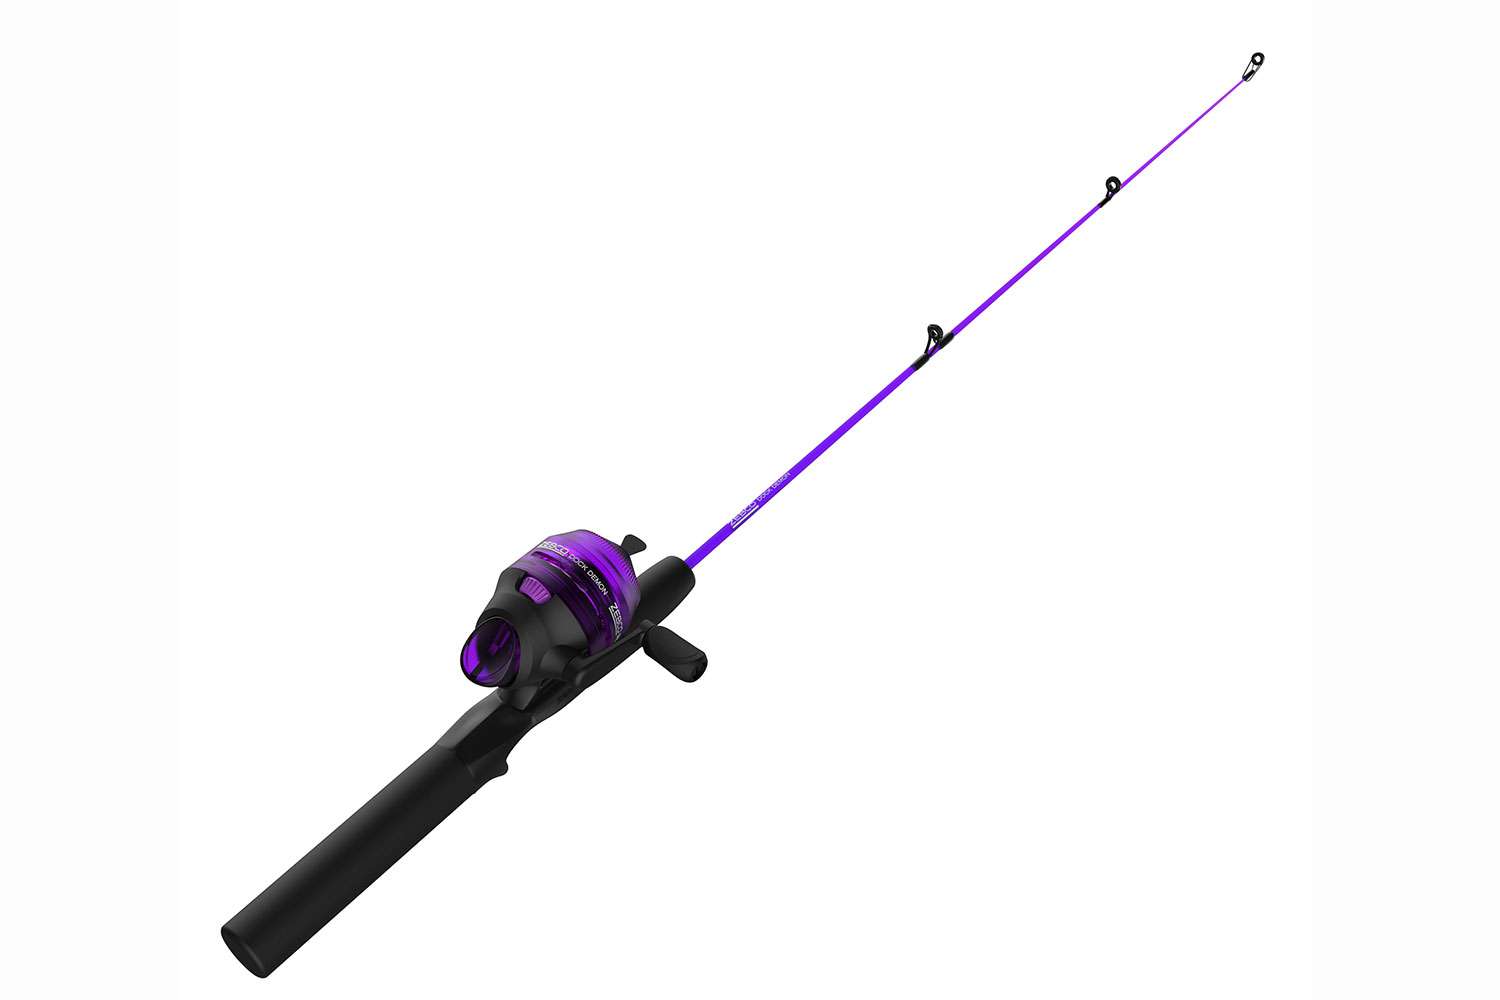 <p><b>Zebco Dock Demon</b></p>
You would be hard-pressed to find a tougher, more affordable 30-inch rod-and-reel combo in all of fishing than Zebcoâs take-anywhere Dock Demon. Not only does the reel feature metal gears typically reserved for far pricier spincast reels, but the 30-rod is made of durable fiberglass to endure any adventure or adversity anglers put it through. The combo also features the patented no-tangle design that made Zebco reels famous, as well as a comfortable EVA foam handle on the rod. The reel comes pre-spooled with 6-pound line. <br>
<p><b>MSRP: $13.99</b></p>
<a href=